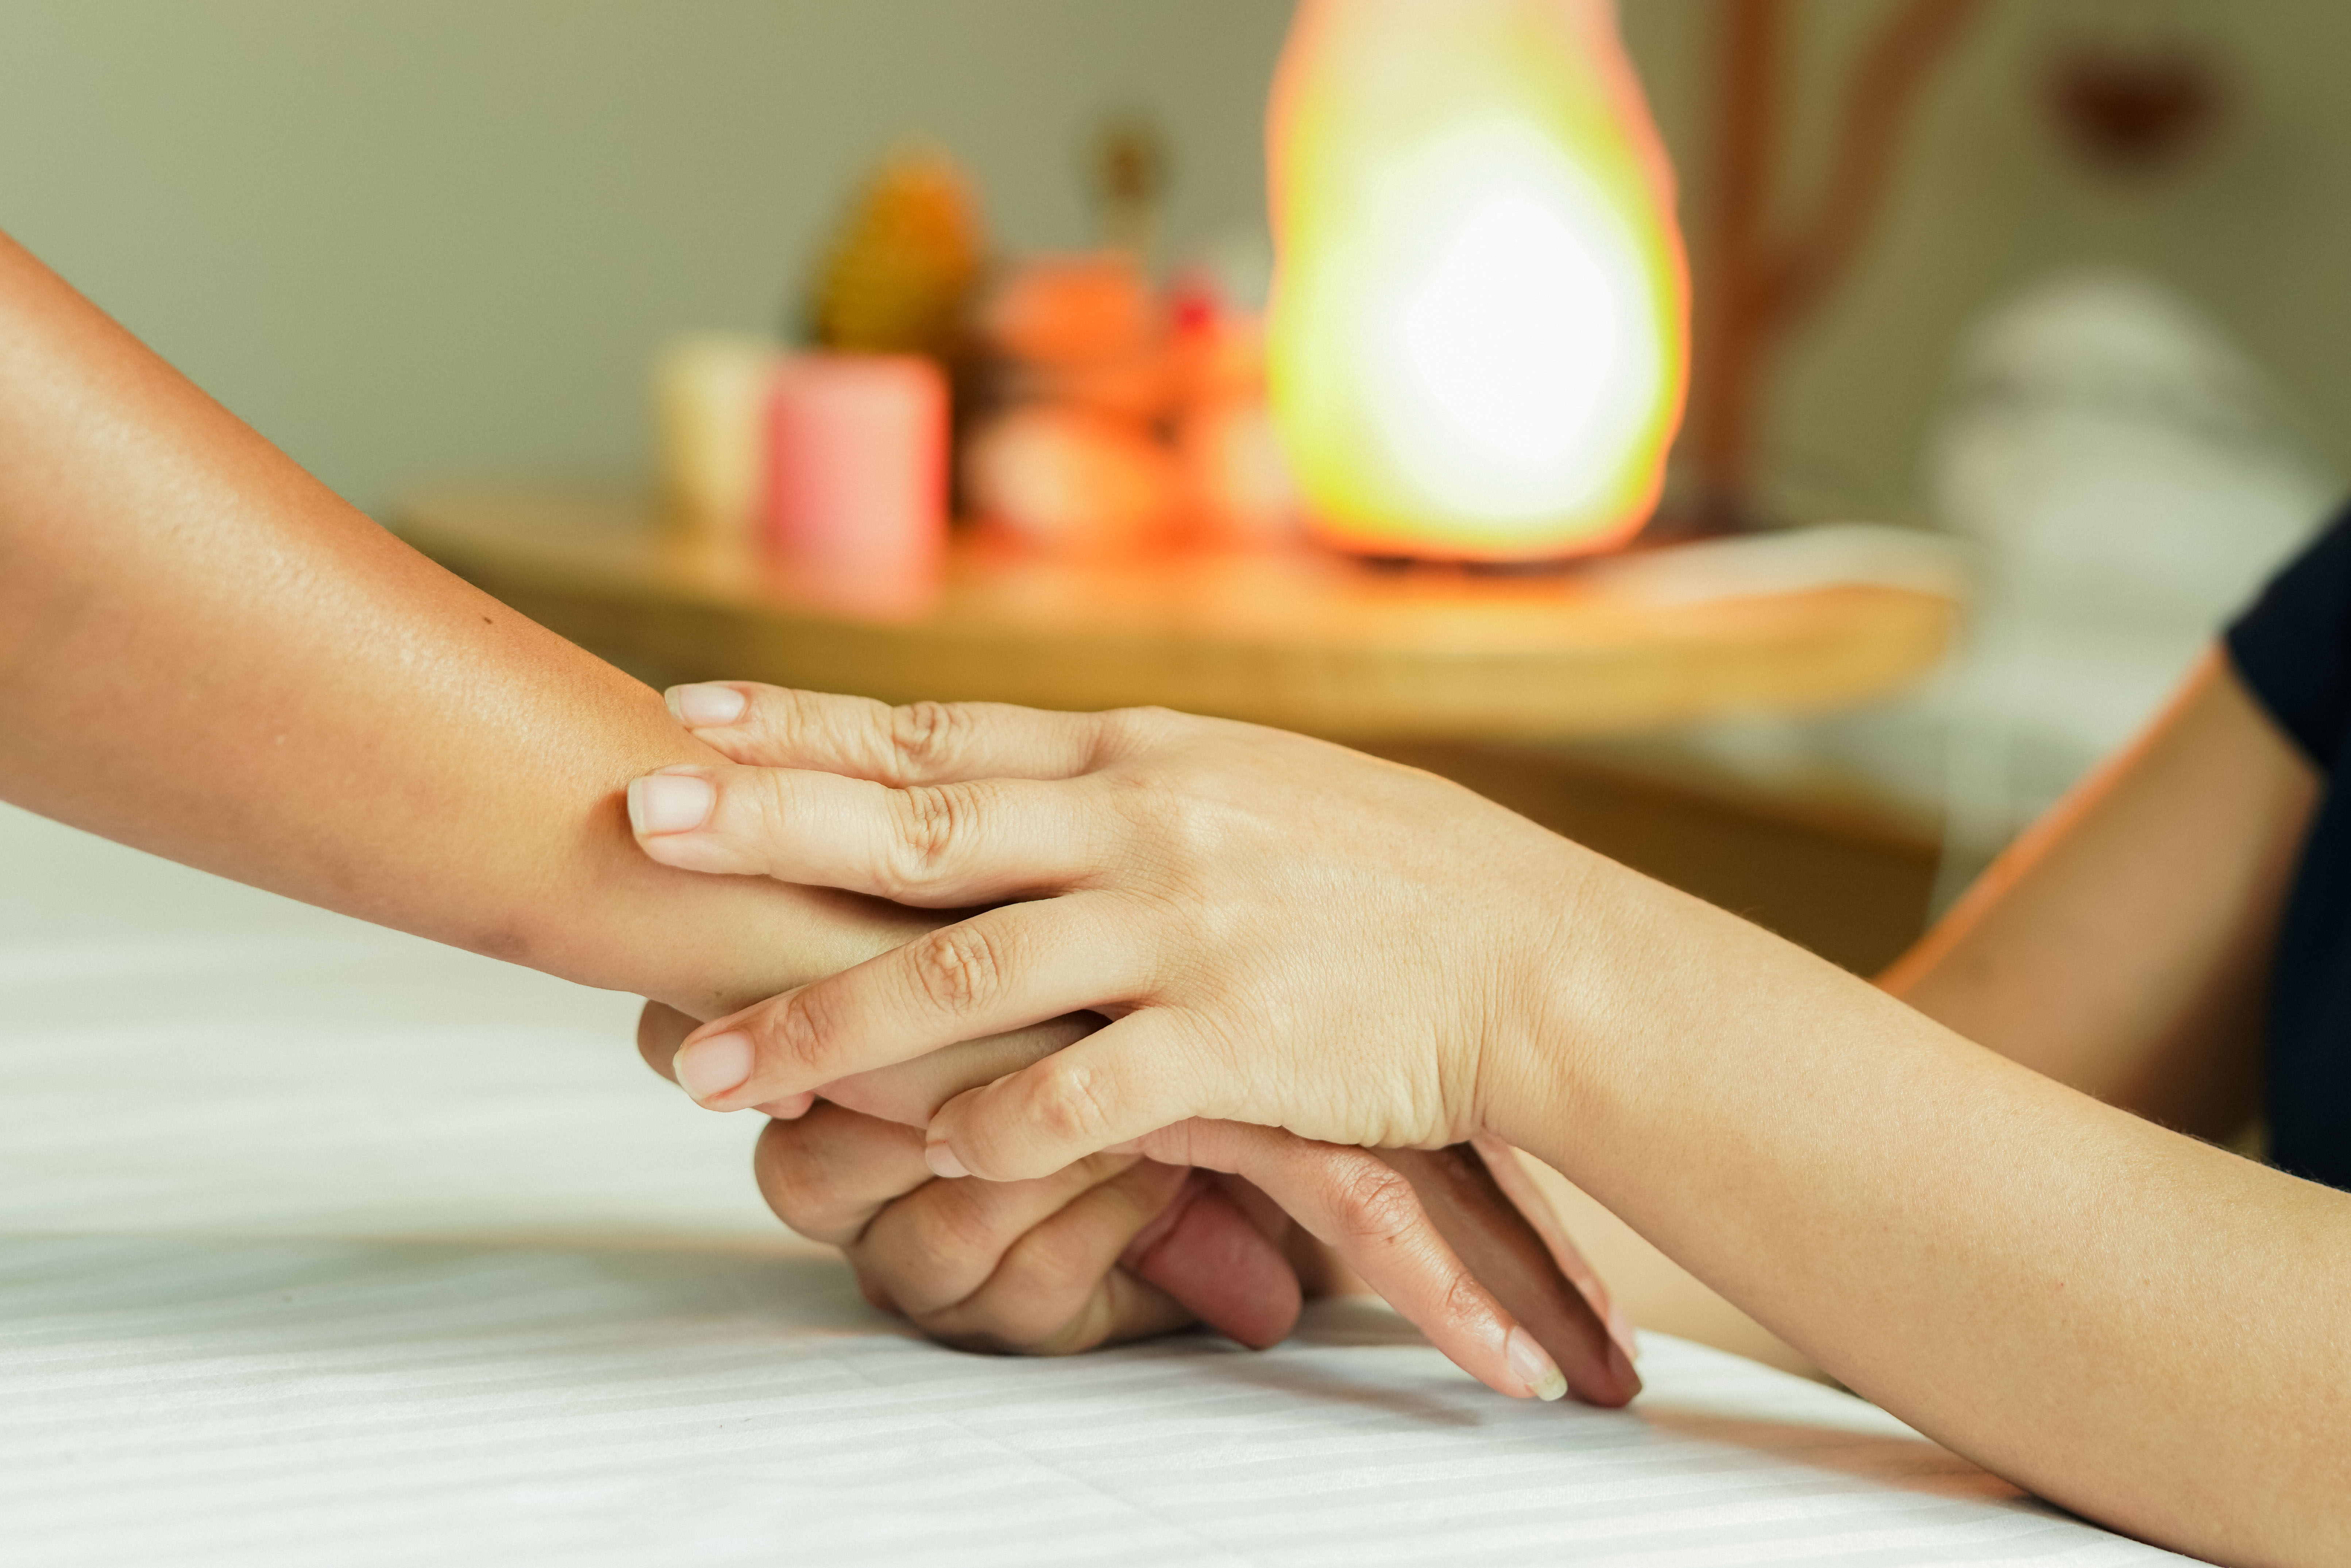 5 Reasons Why You Should Book a Relaxing Massage Therapy at Avata